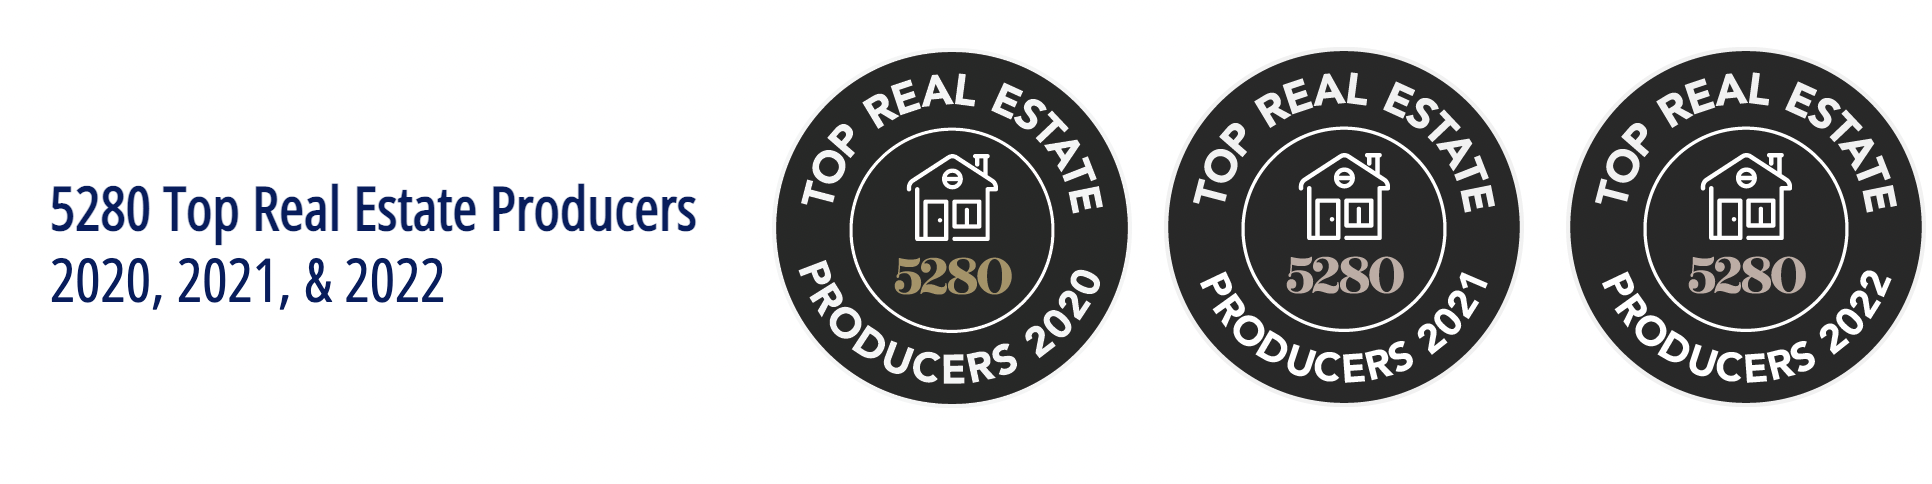 5280 Top Real Estate Producers 2020, 2021, 2022 - The Fowler Group